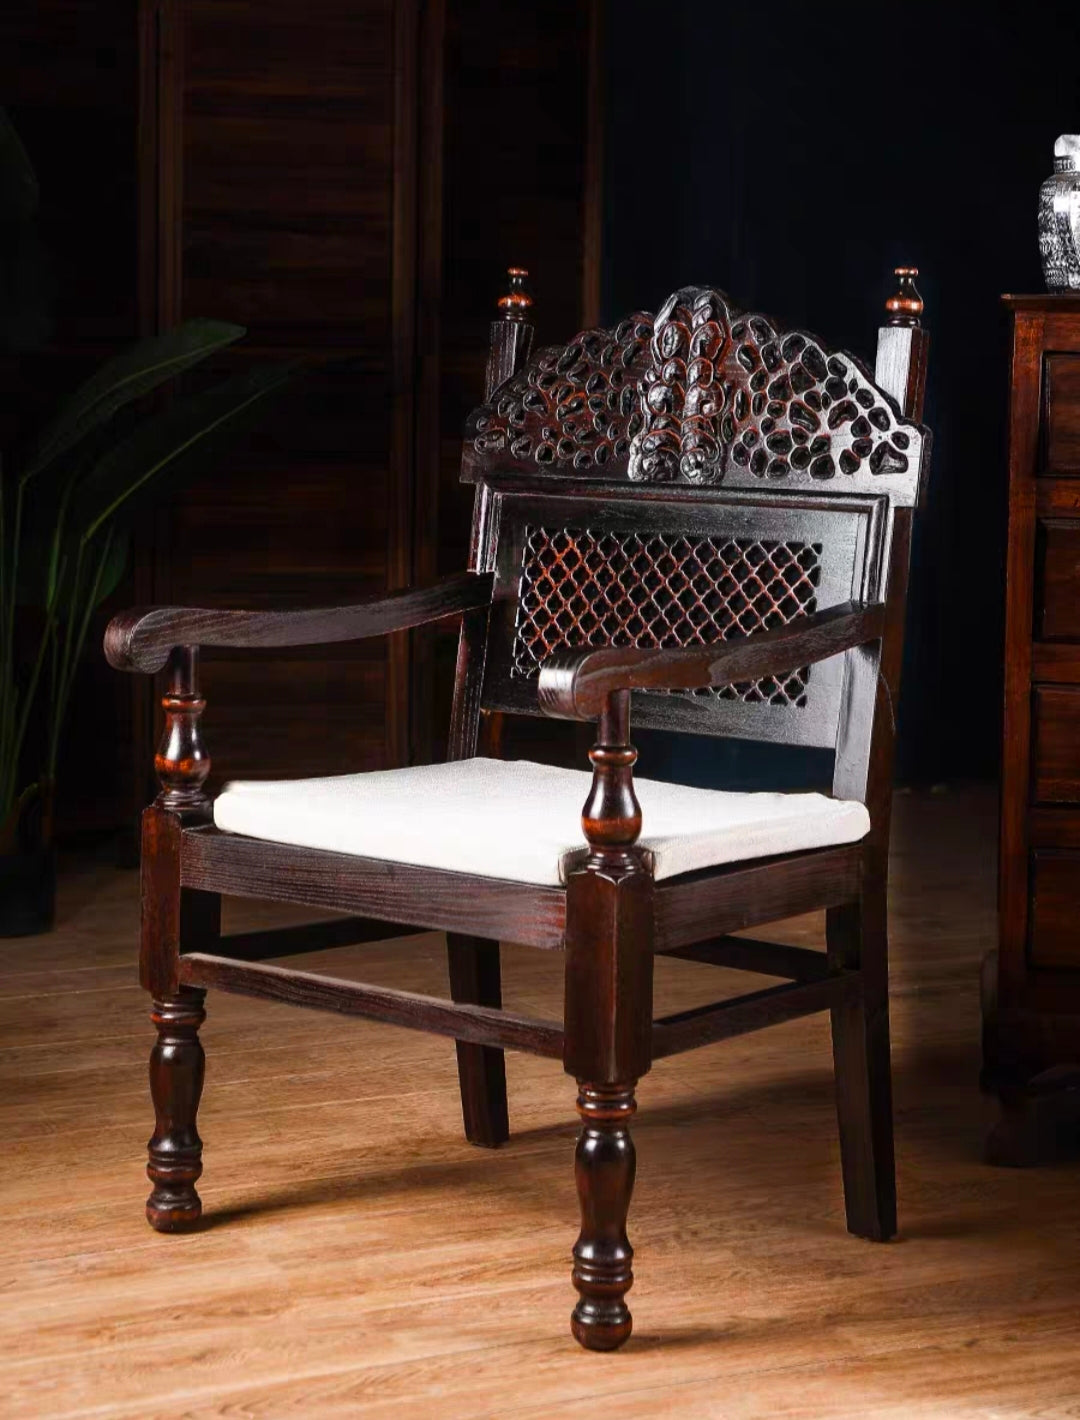 ILD Hand-Crafted Wooden Chair